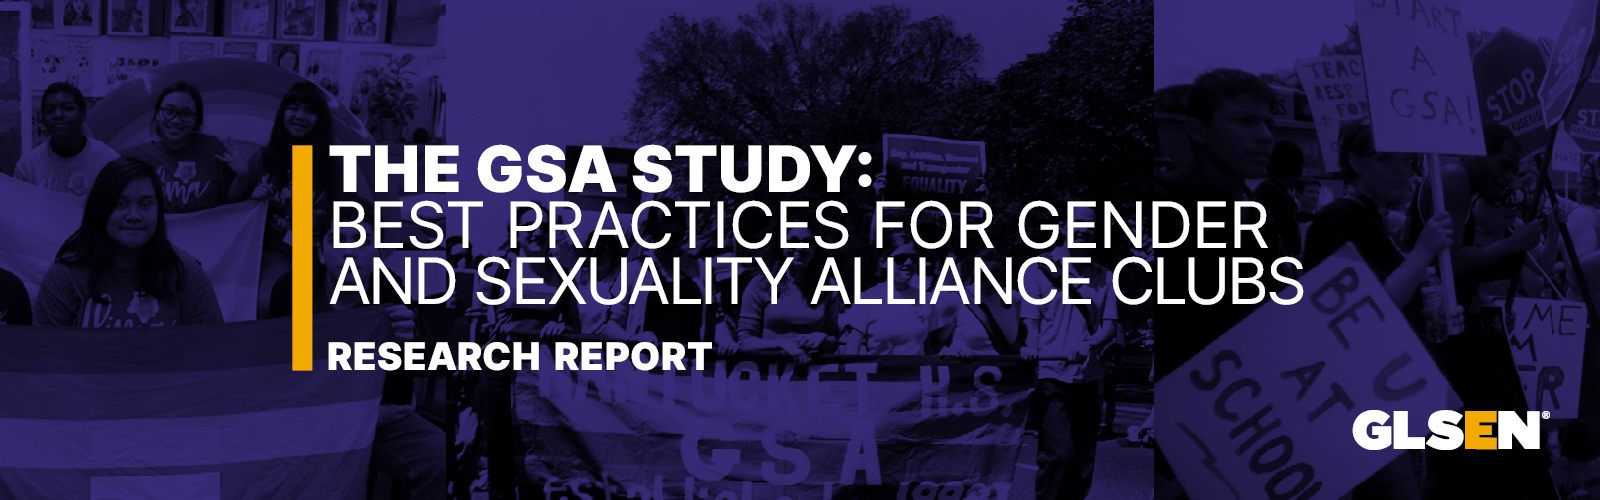 GSA: Best Practices for Gender and Sexuality Alliance Clubs